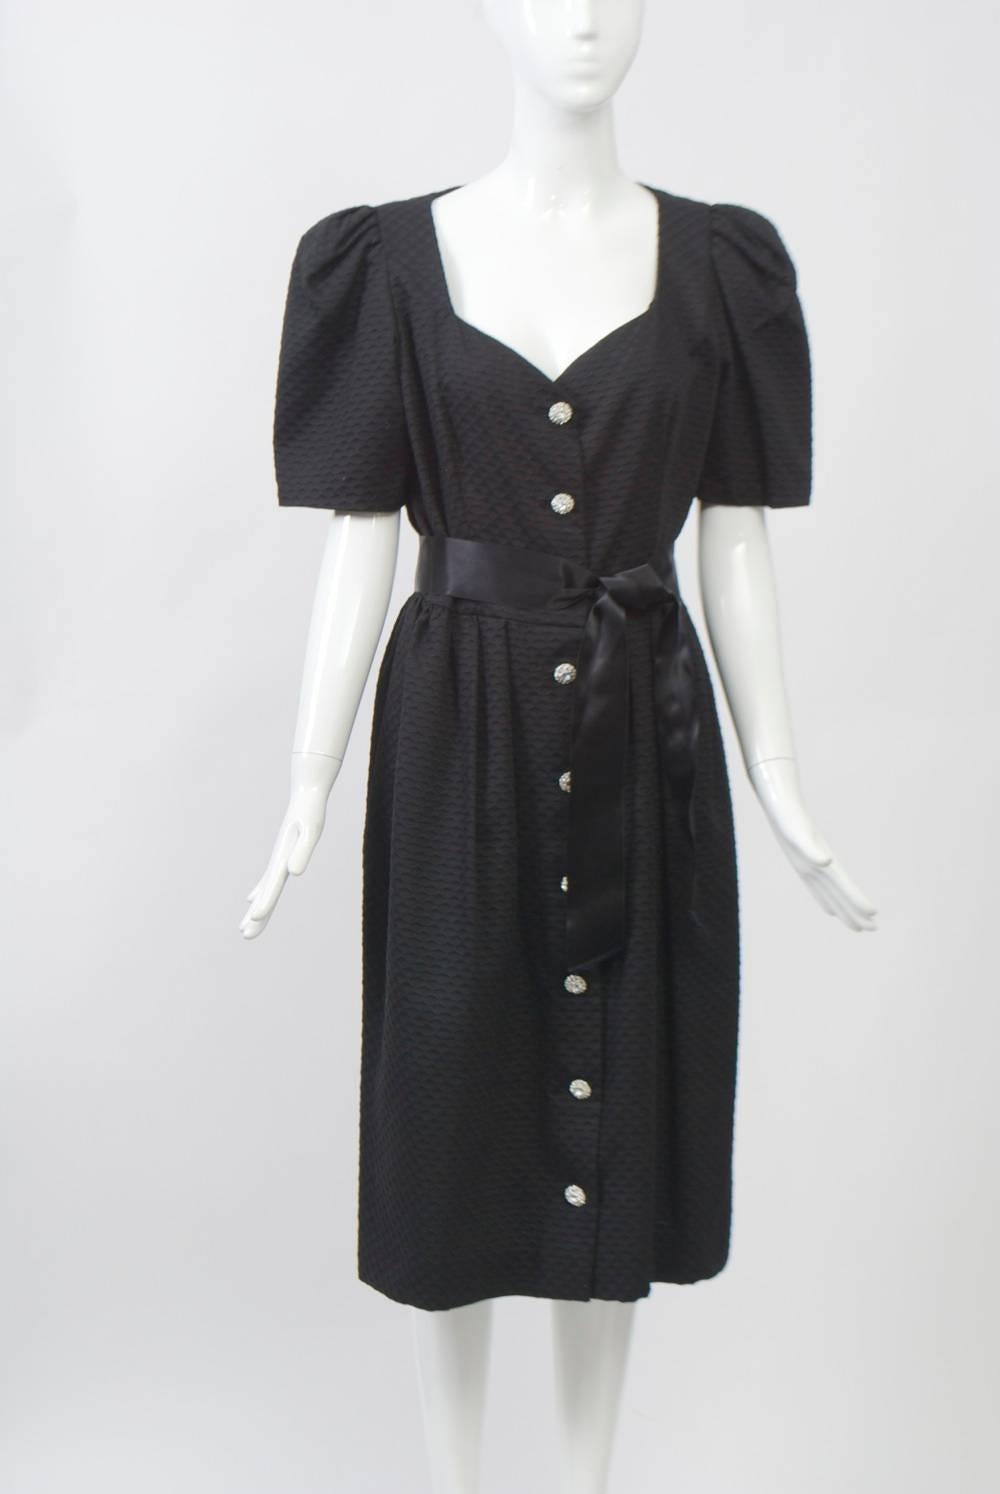 Shirt-style dress by Oscar de la Renta in black textured cotton dressed up with rhinestone buttons and a satin sash, as well as a sweetheart neckline. Additional features are puffed, short sleeves and a gathered skirt that ends below the knees.